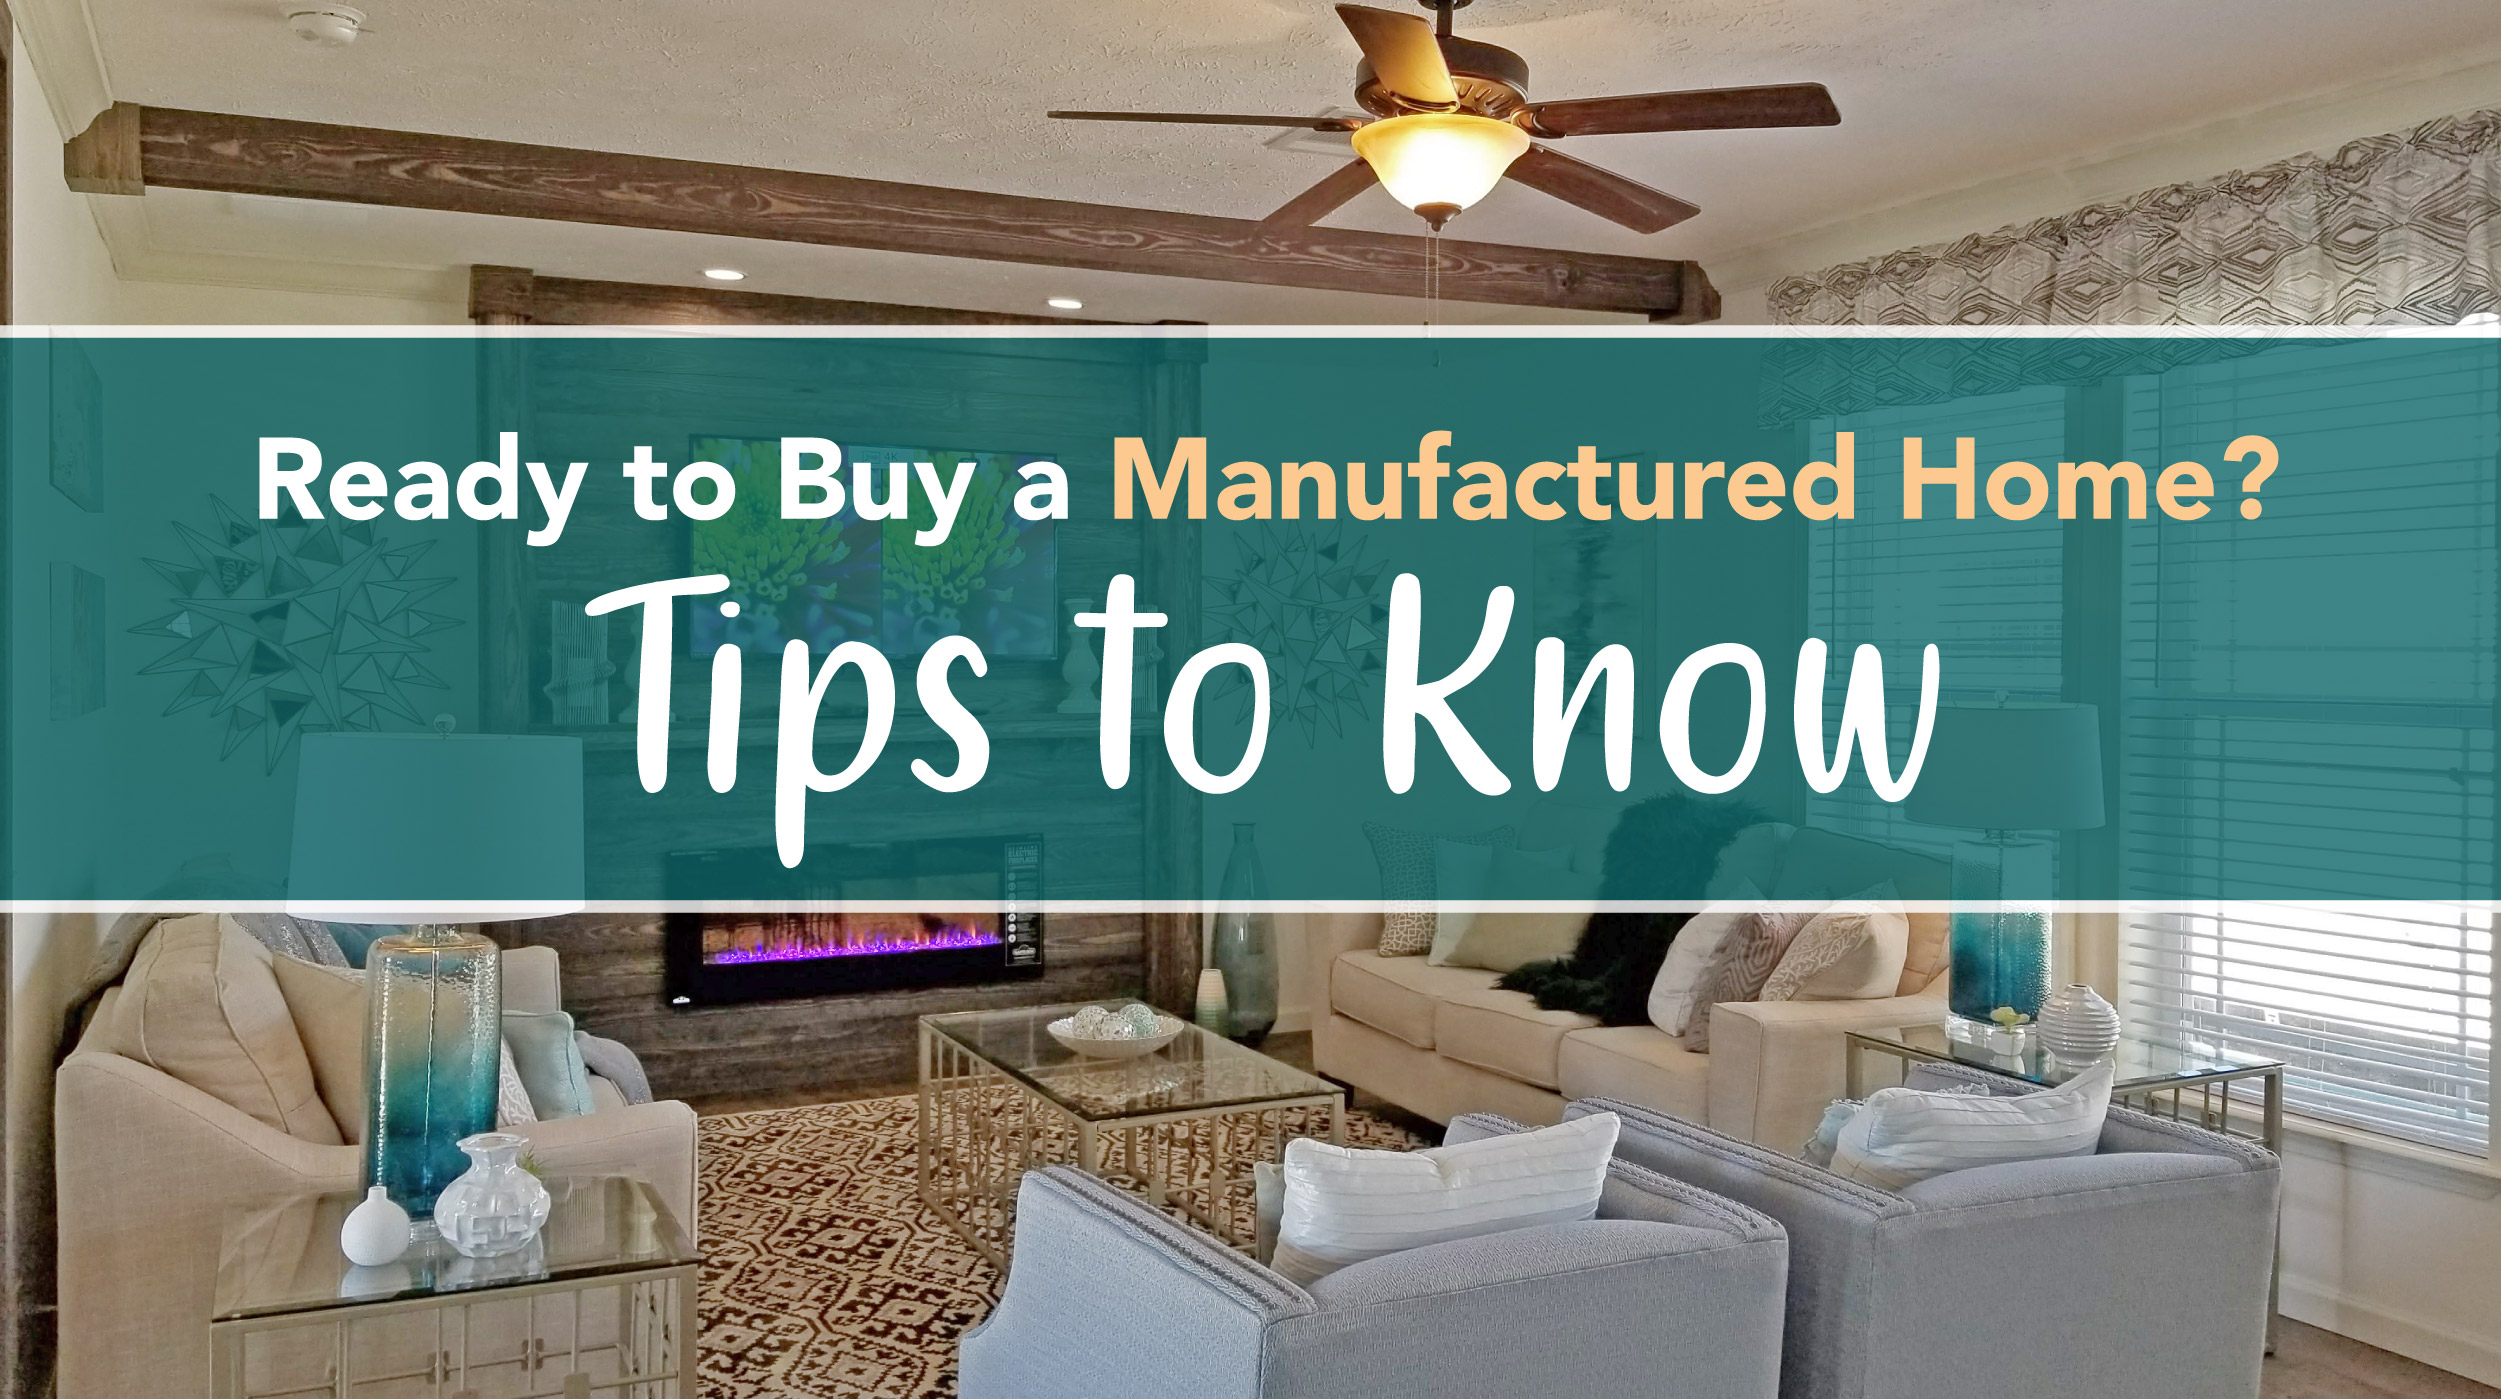 Ready to Buy a Manufactured Home? Tips to Know